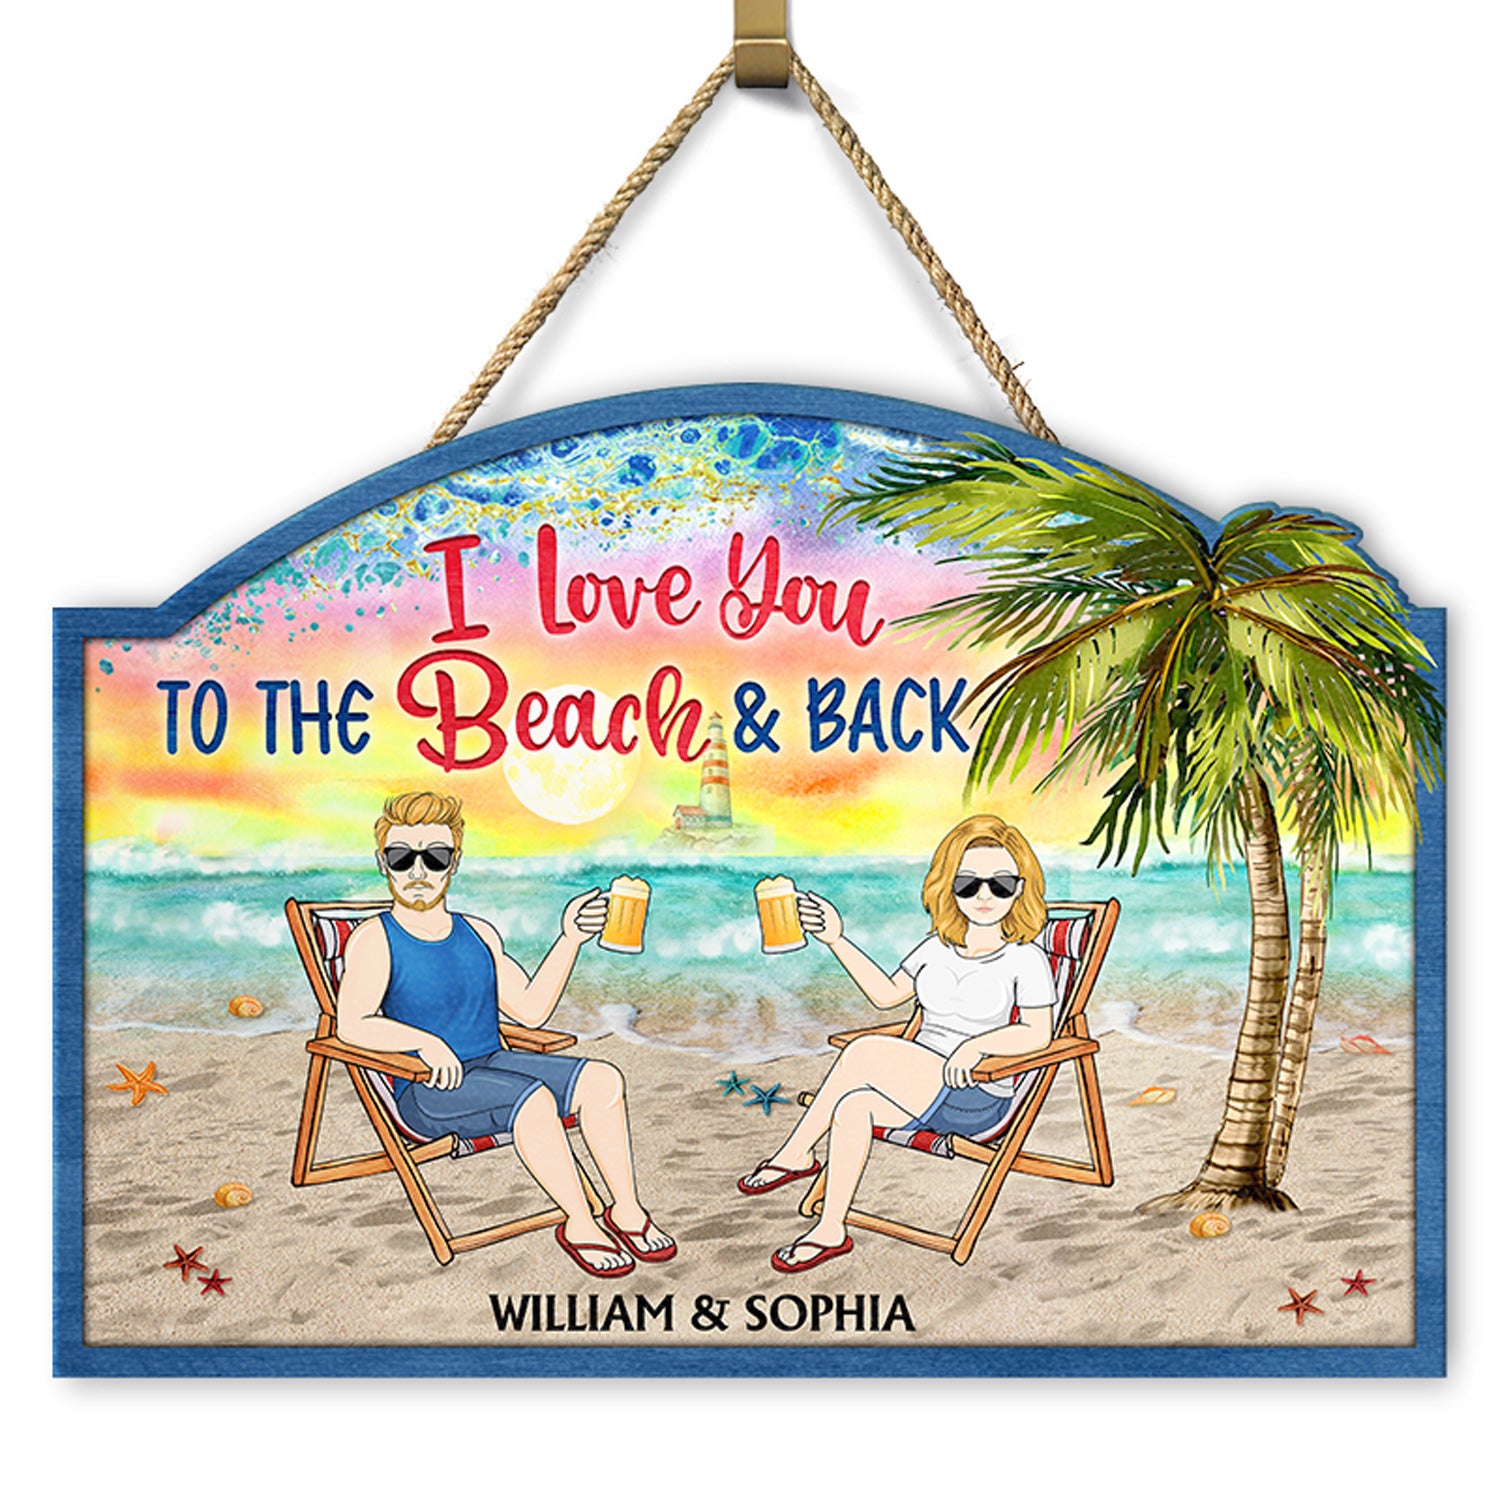 I Love You To The Beach And Back Family - Home Decor, Backyard Decor, Gift For Couples, Husband, Wife - Personalized Custom Shaped Wood Sign